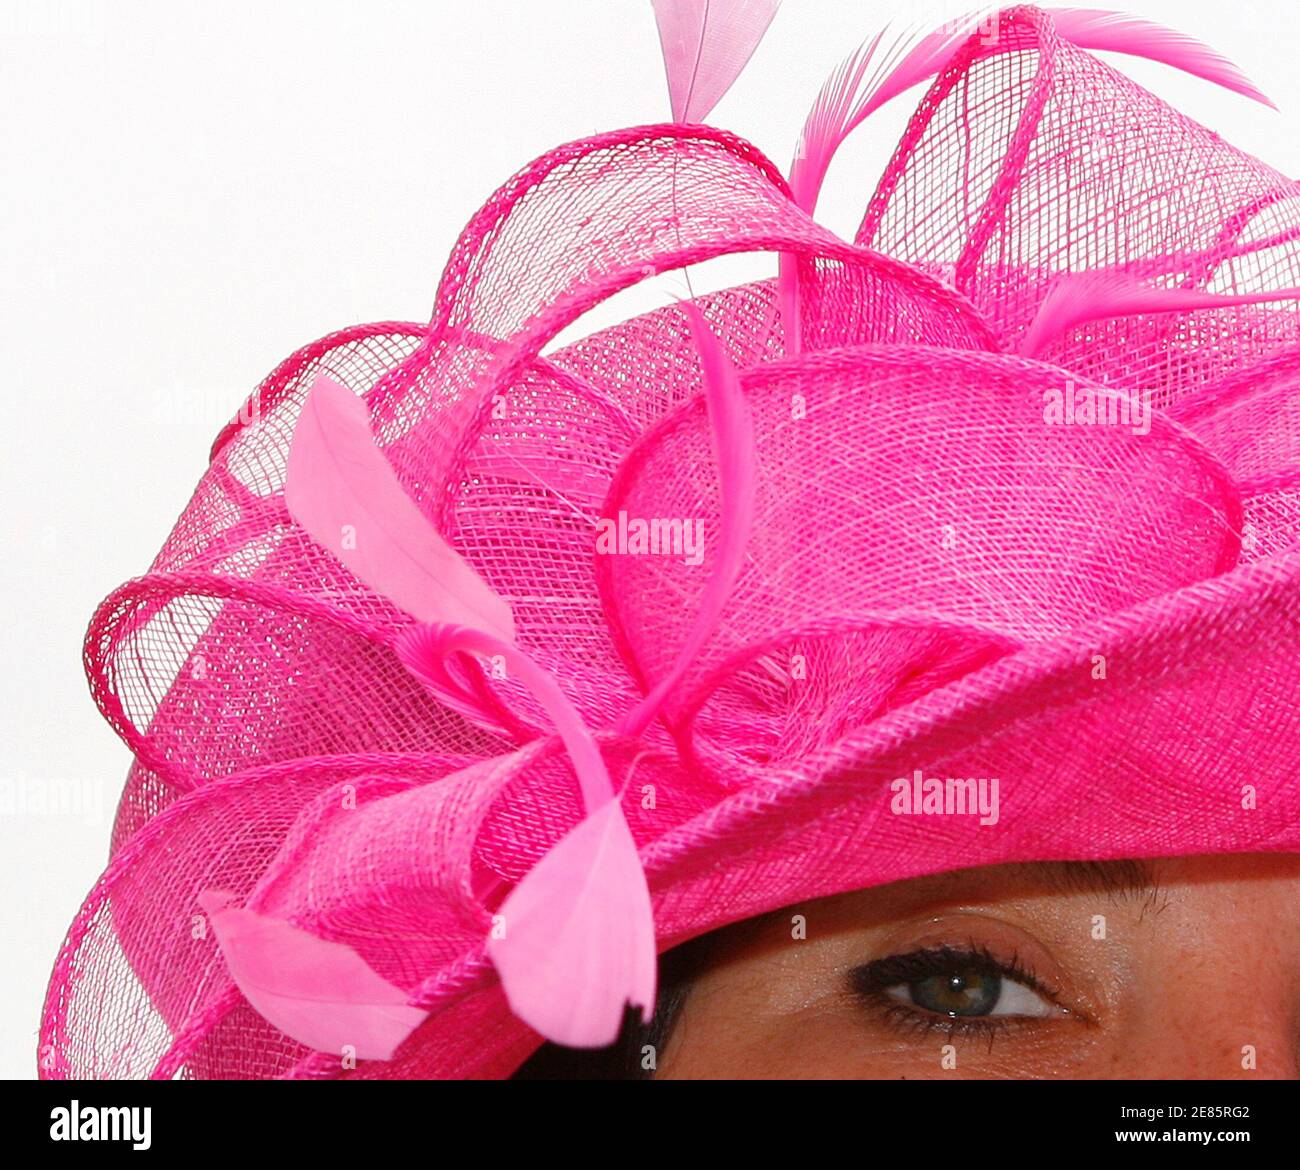 A detail is seen on a woman's hat during Ladies day at the Epsom Derby Festival at Epsom Downs in Surrey, southern England June 6, 2008.      REUTERS/Darren Staples   (BRITAIN) Stock Photo